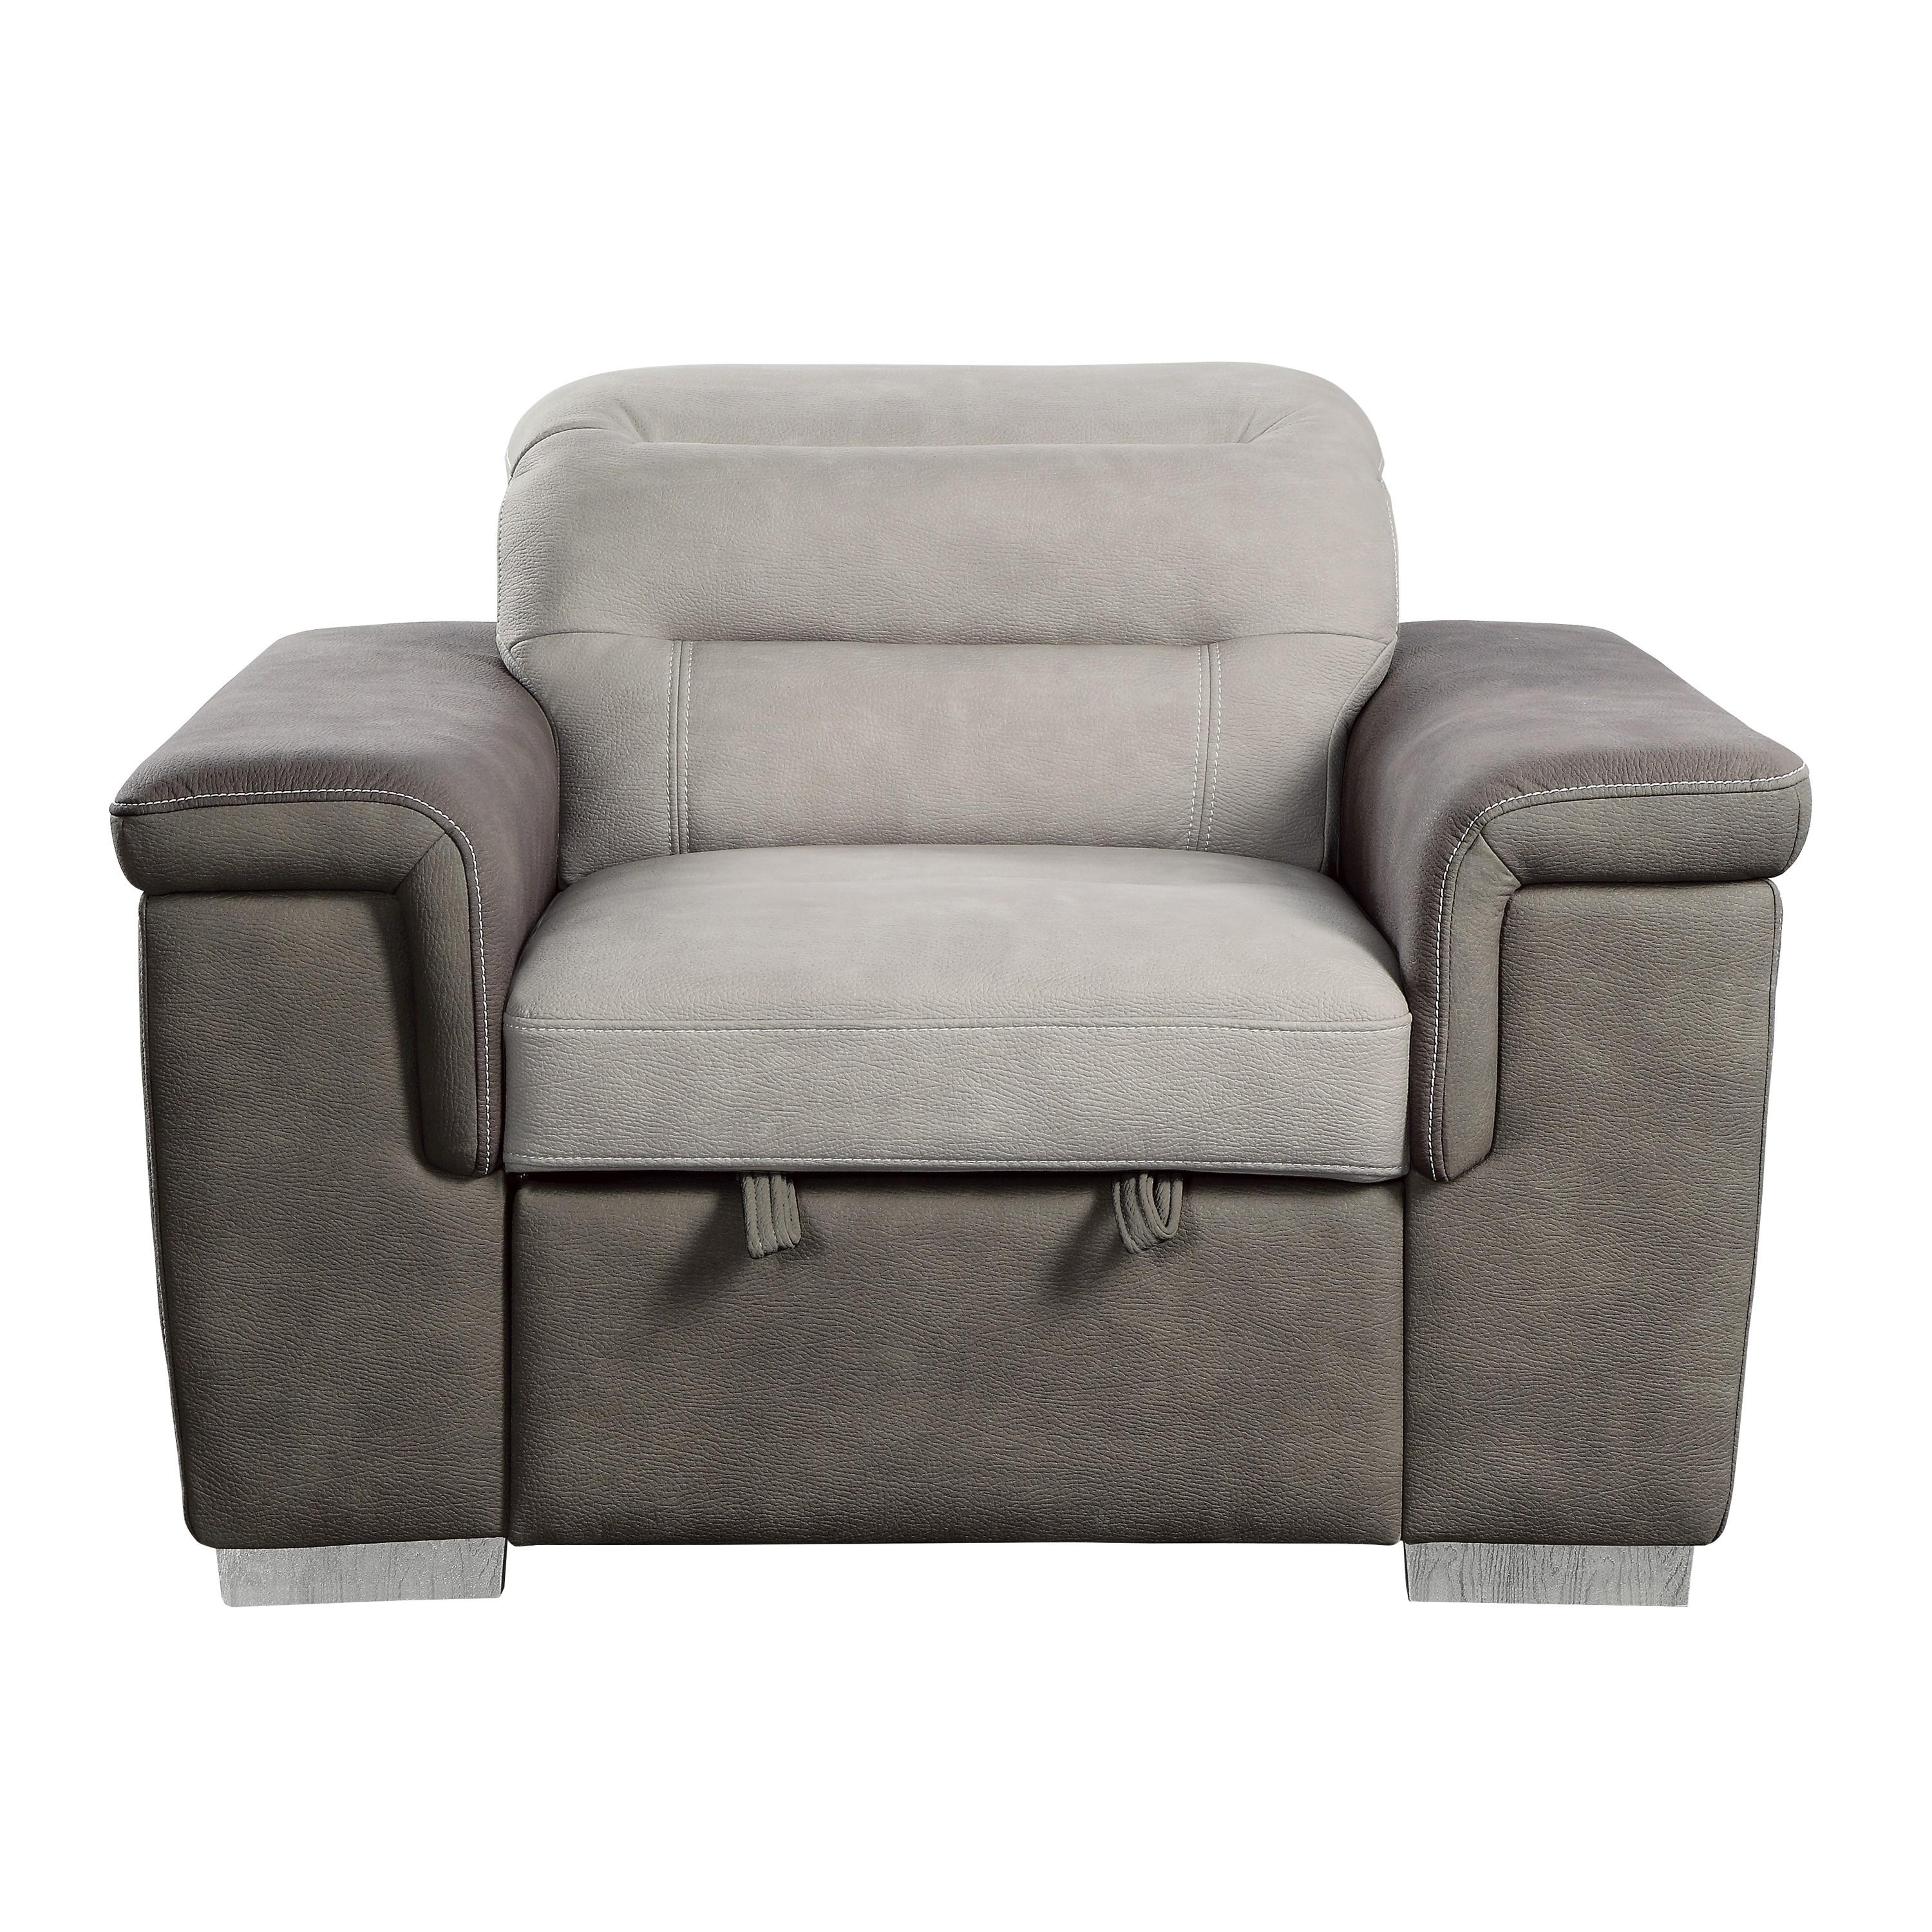 Contemporary Arm Chair 9808-1 Alfio 9808-1 in Taupe, Beige Microfiber